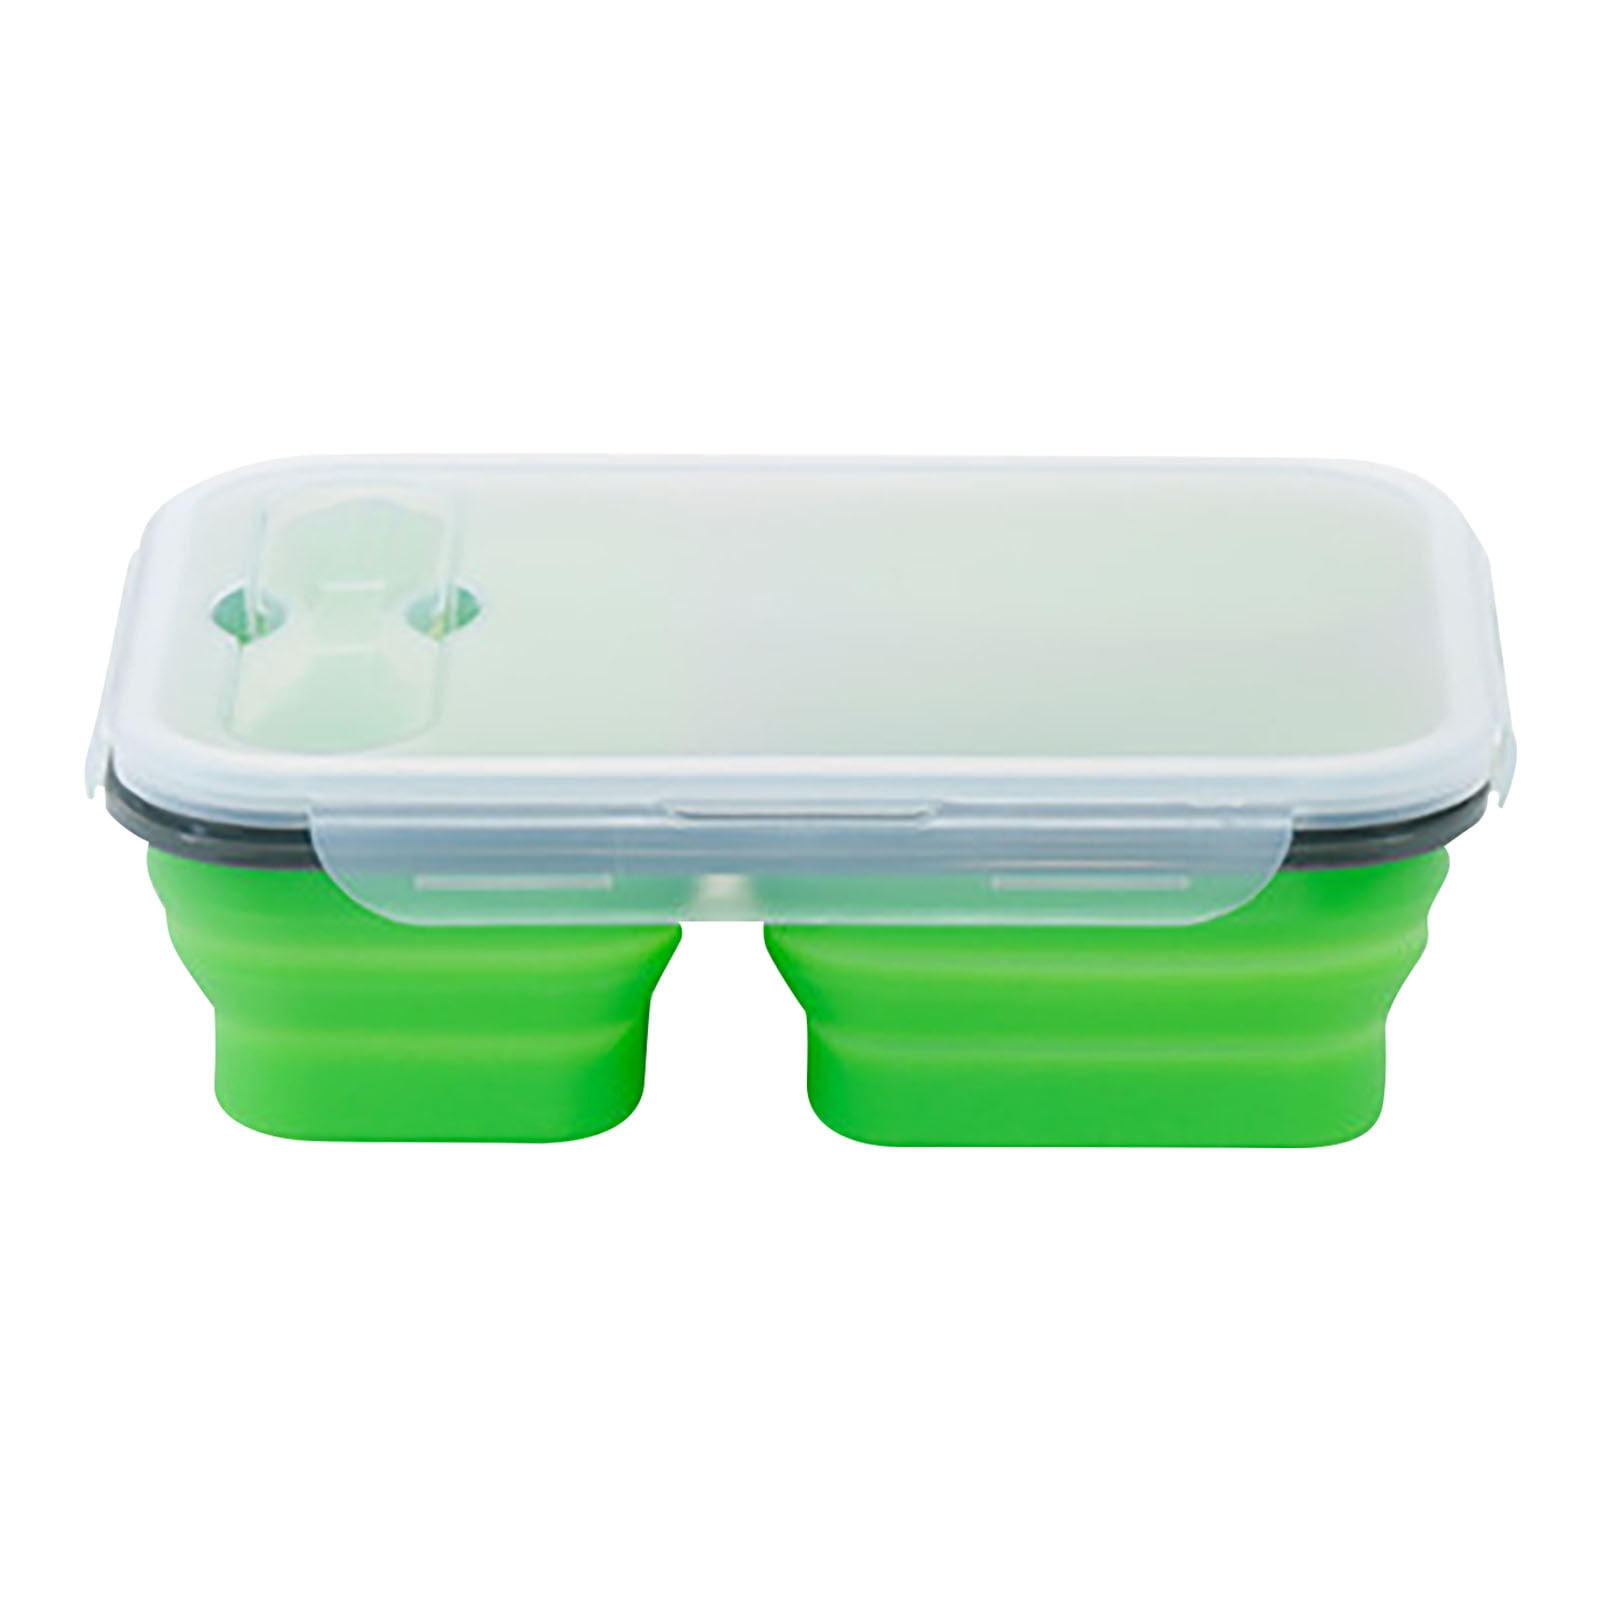 Xmmswdla Collapsible Bento Box, Lunch Box 3 Compartment, Premium Silicone, , Airtight Snap-Top Lid, Microw3ve and Dishwasher Safe, Set of 2(Green)